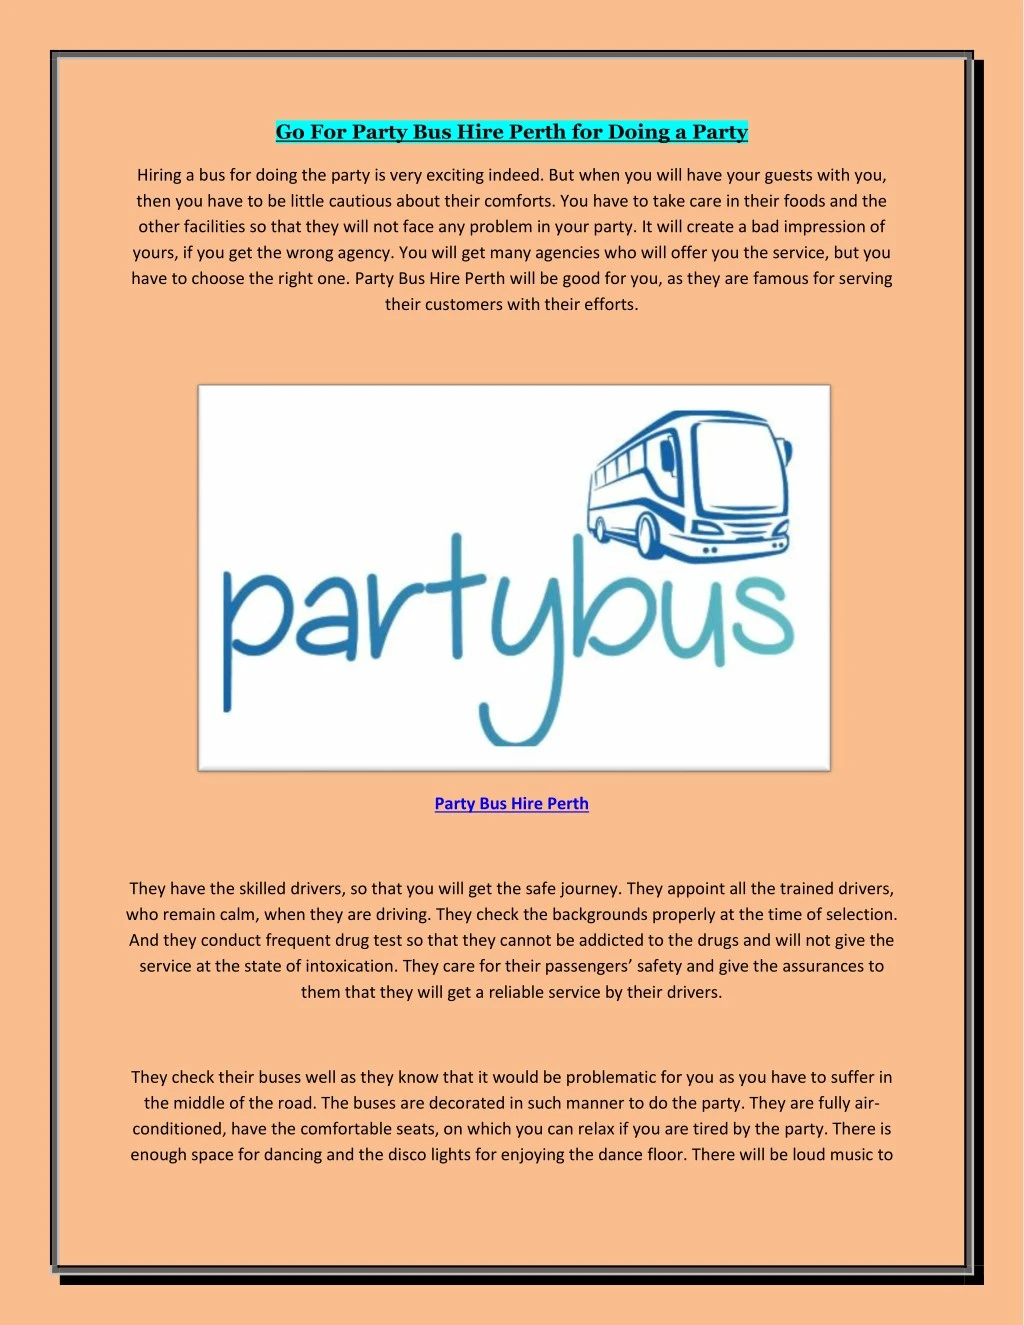 go for party bus hire perth for doing a party n.